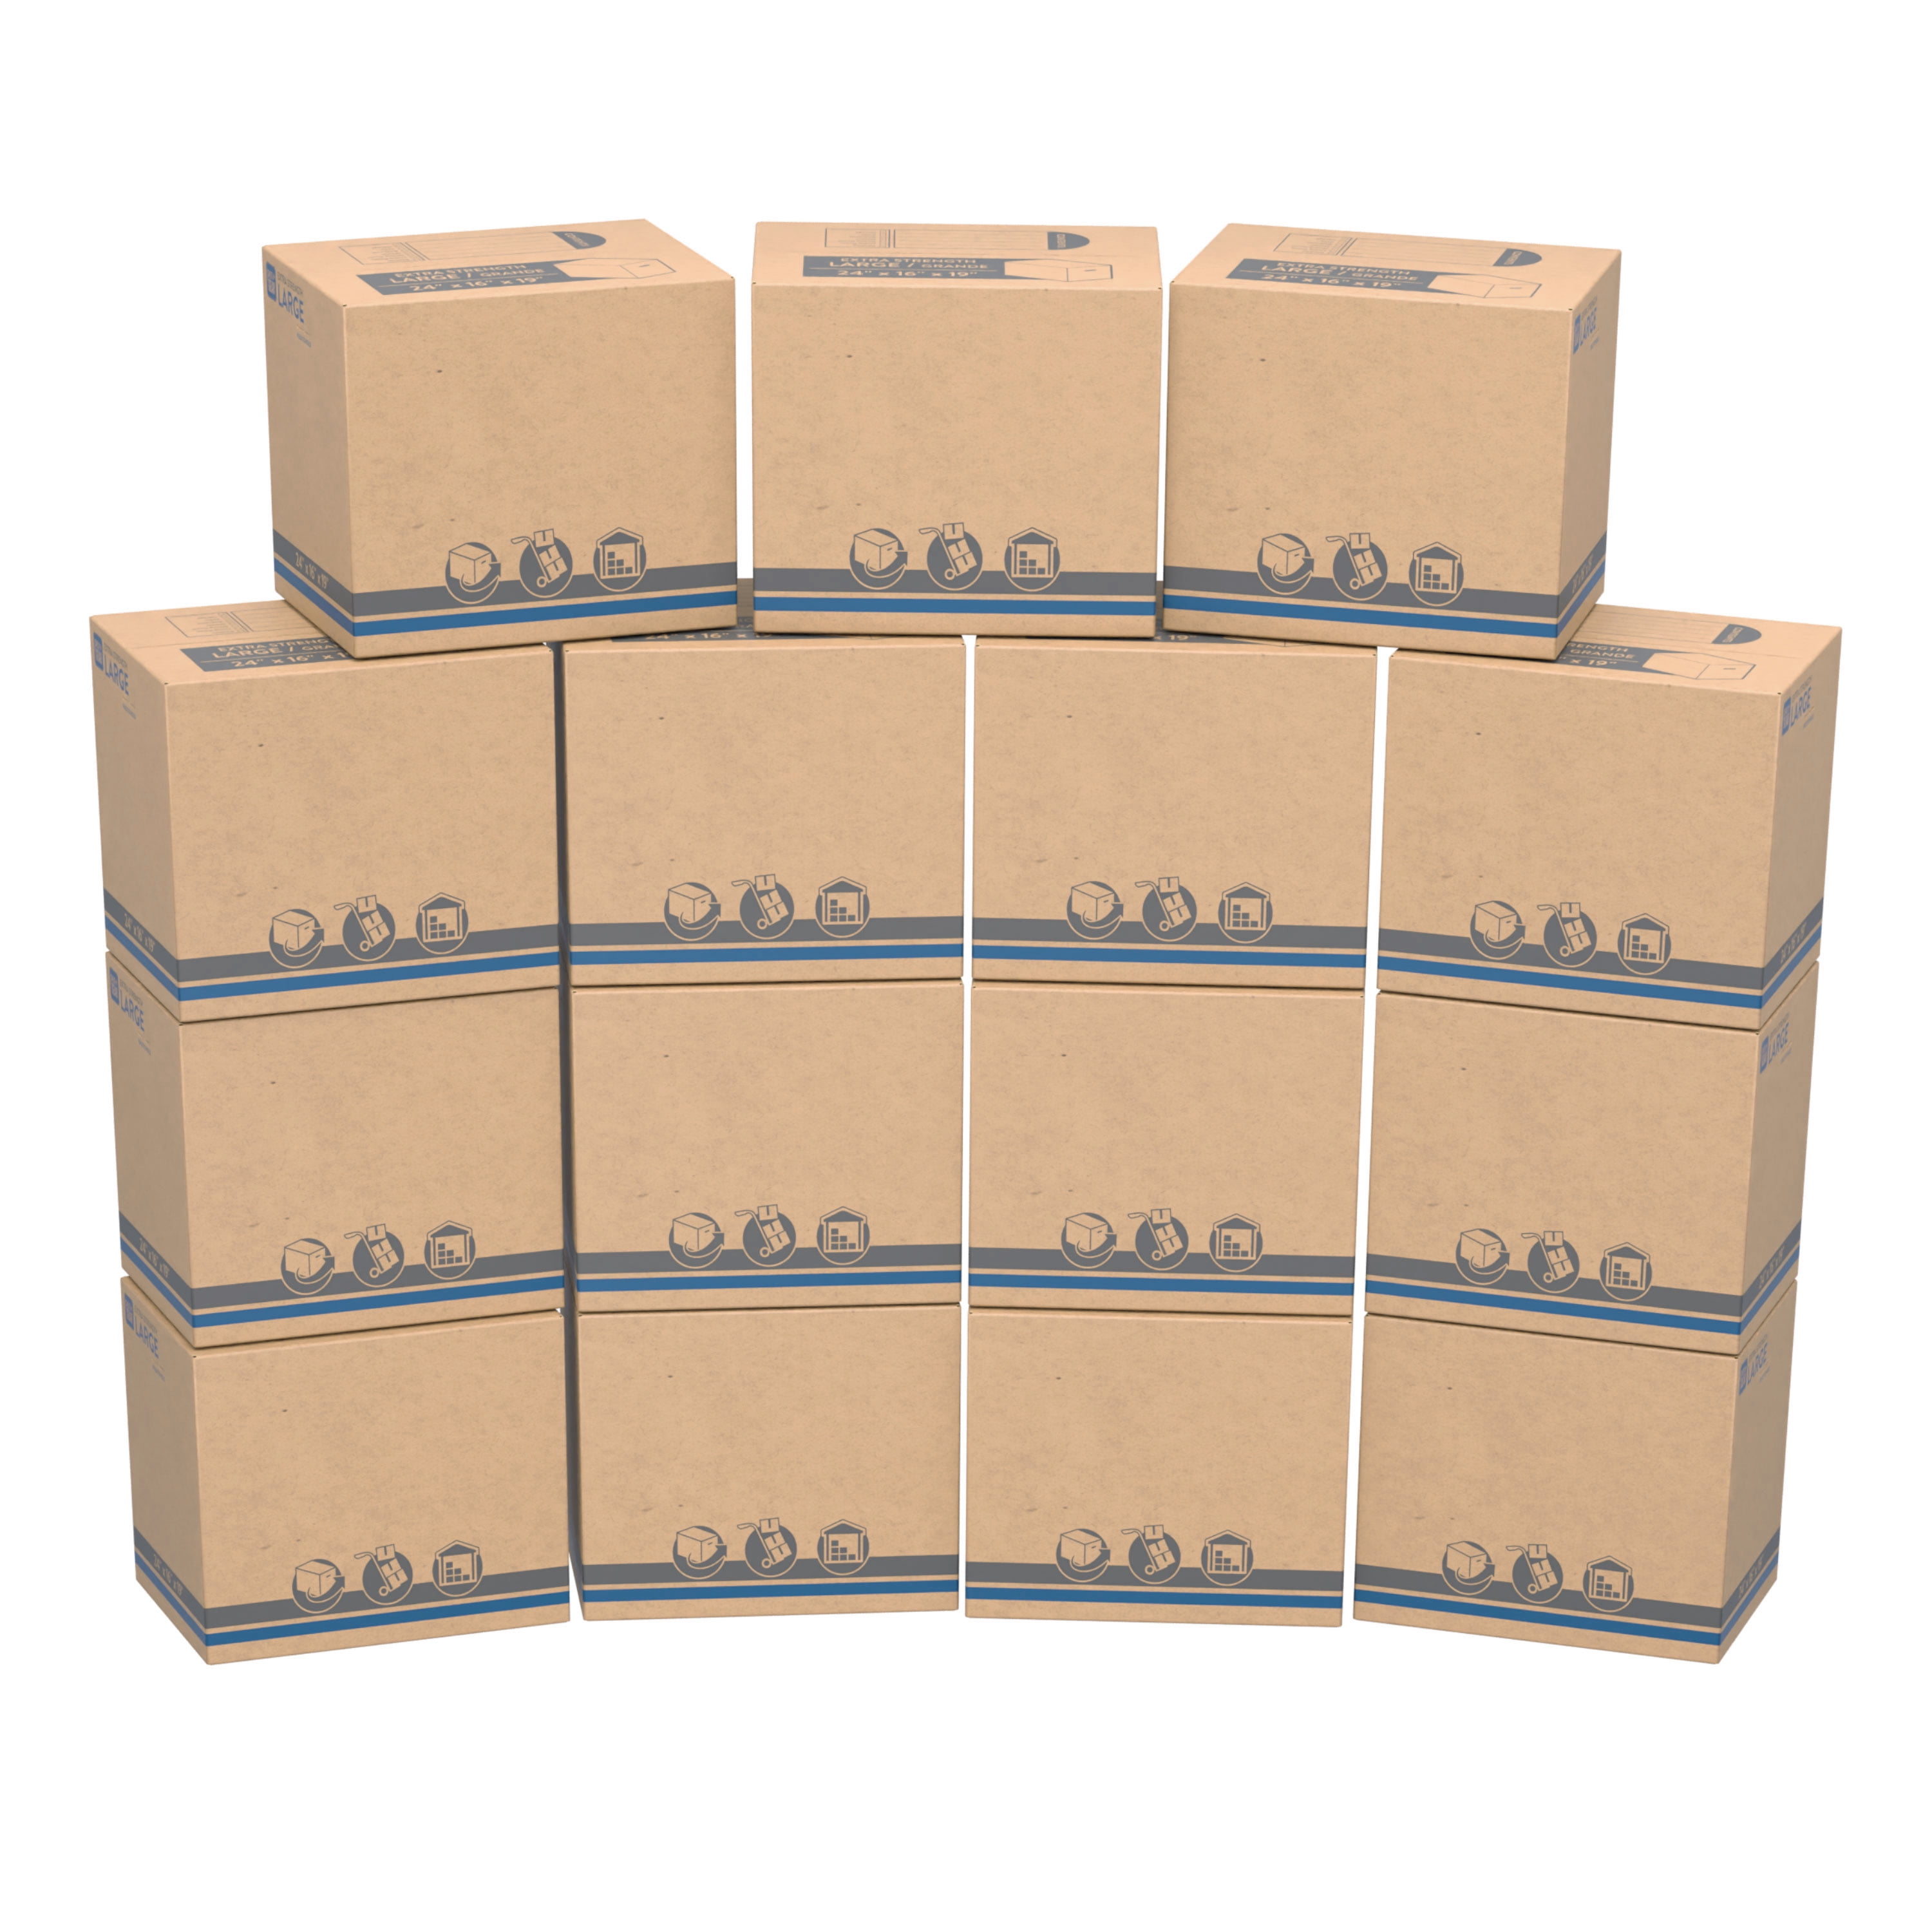 Pen+Gear 24 in x 24 in White Packing Paper for Moving & Shipping, 220  Sheets, 7.22 lb